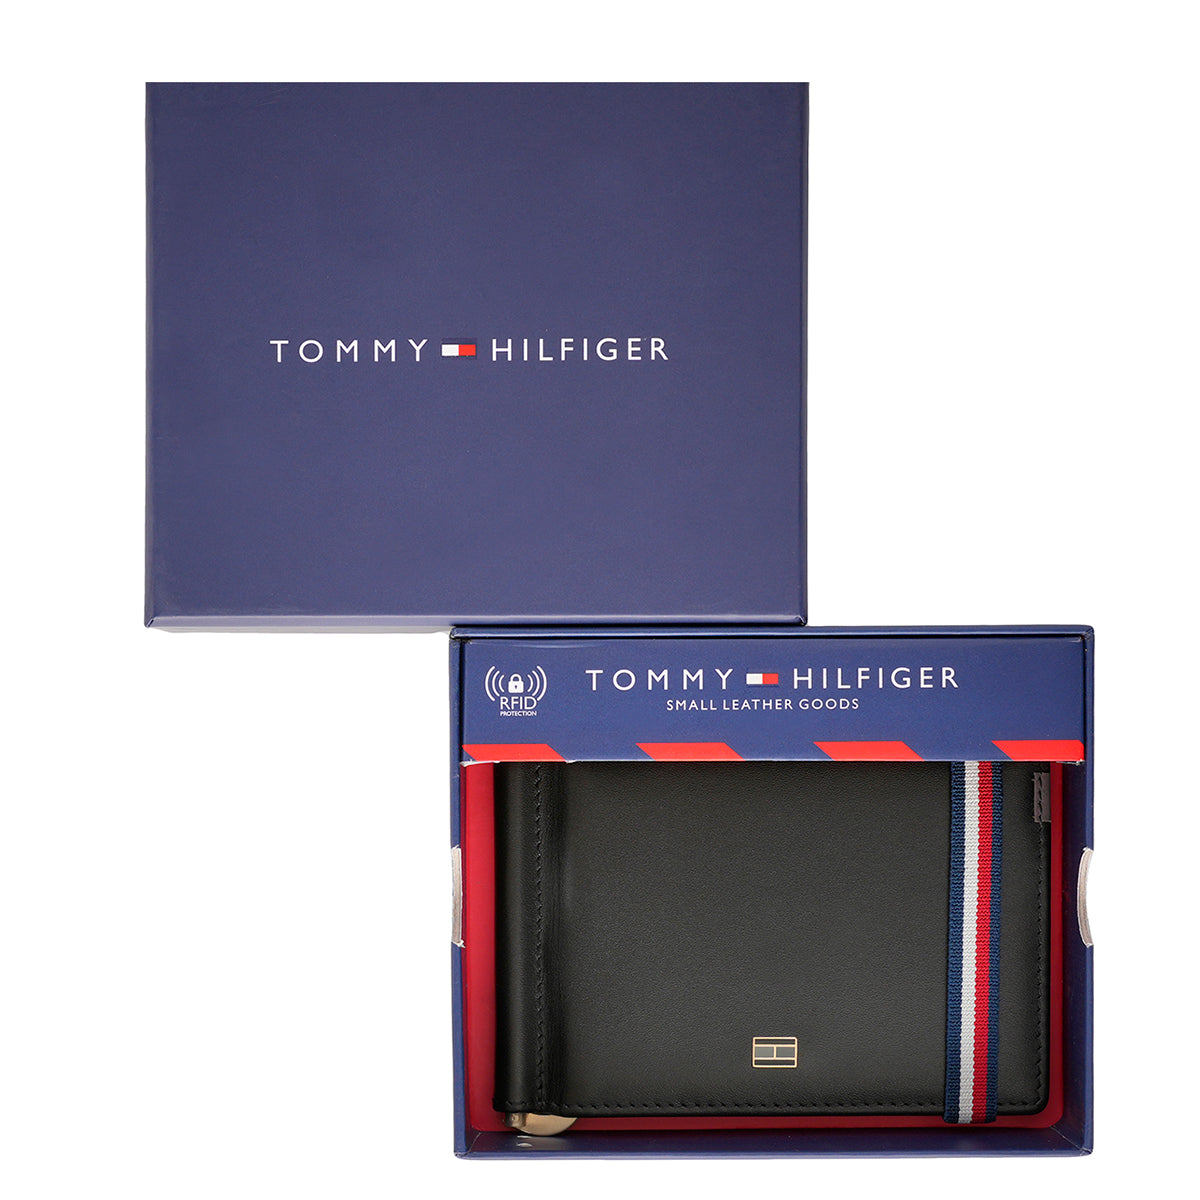 Tommy Hilfiger Small Leather Goods Crivitz Money Clip Navy